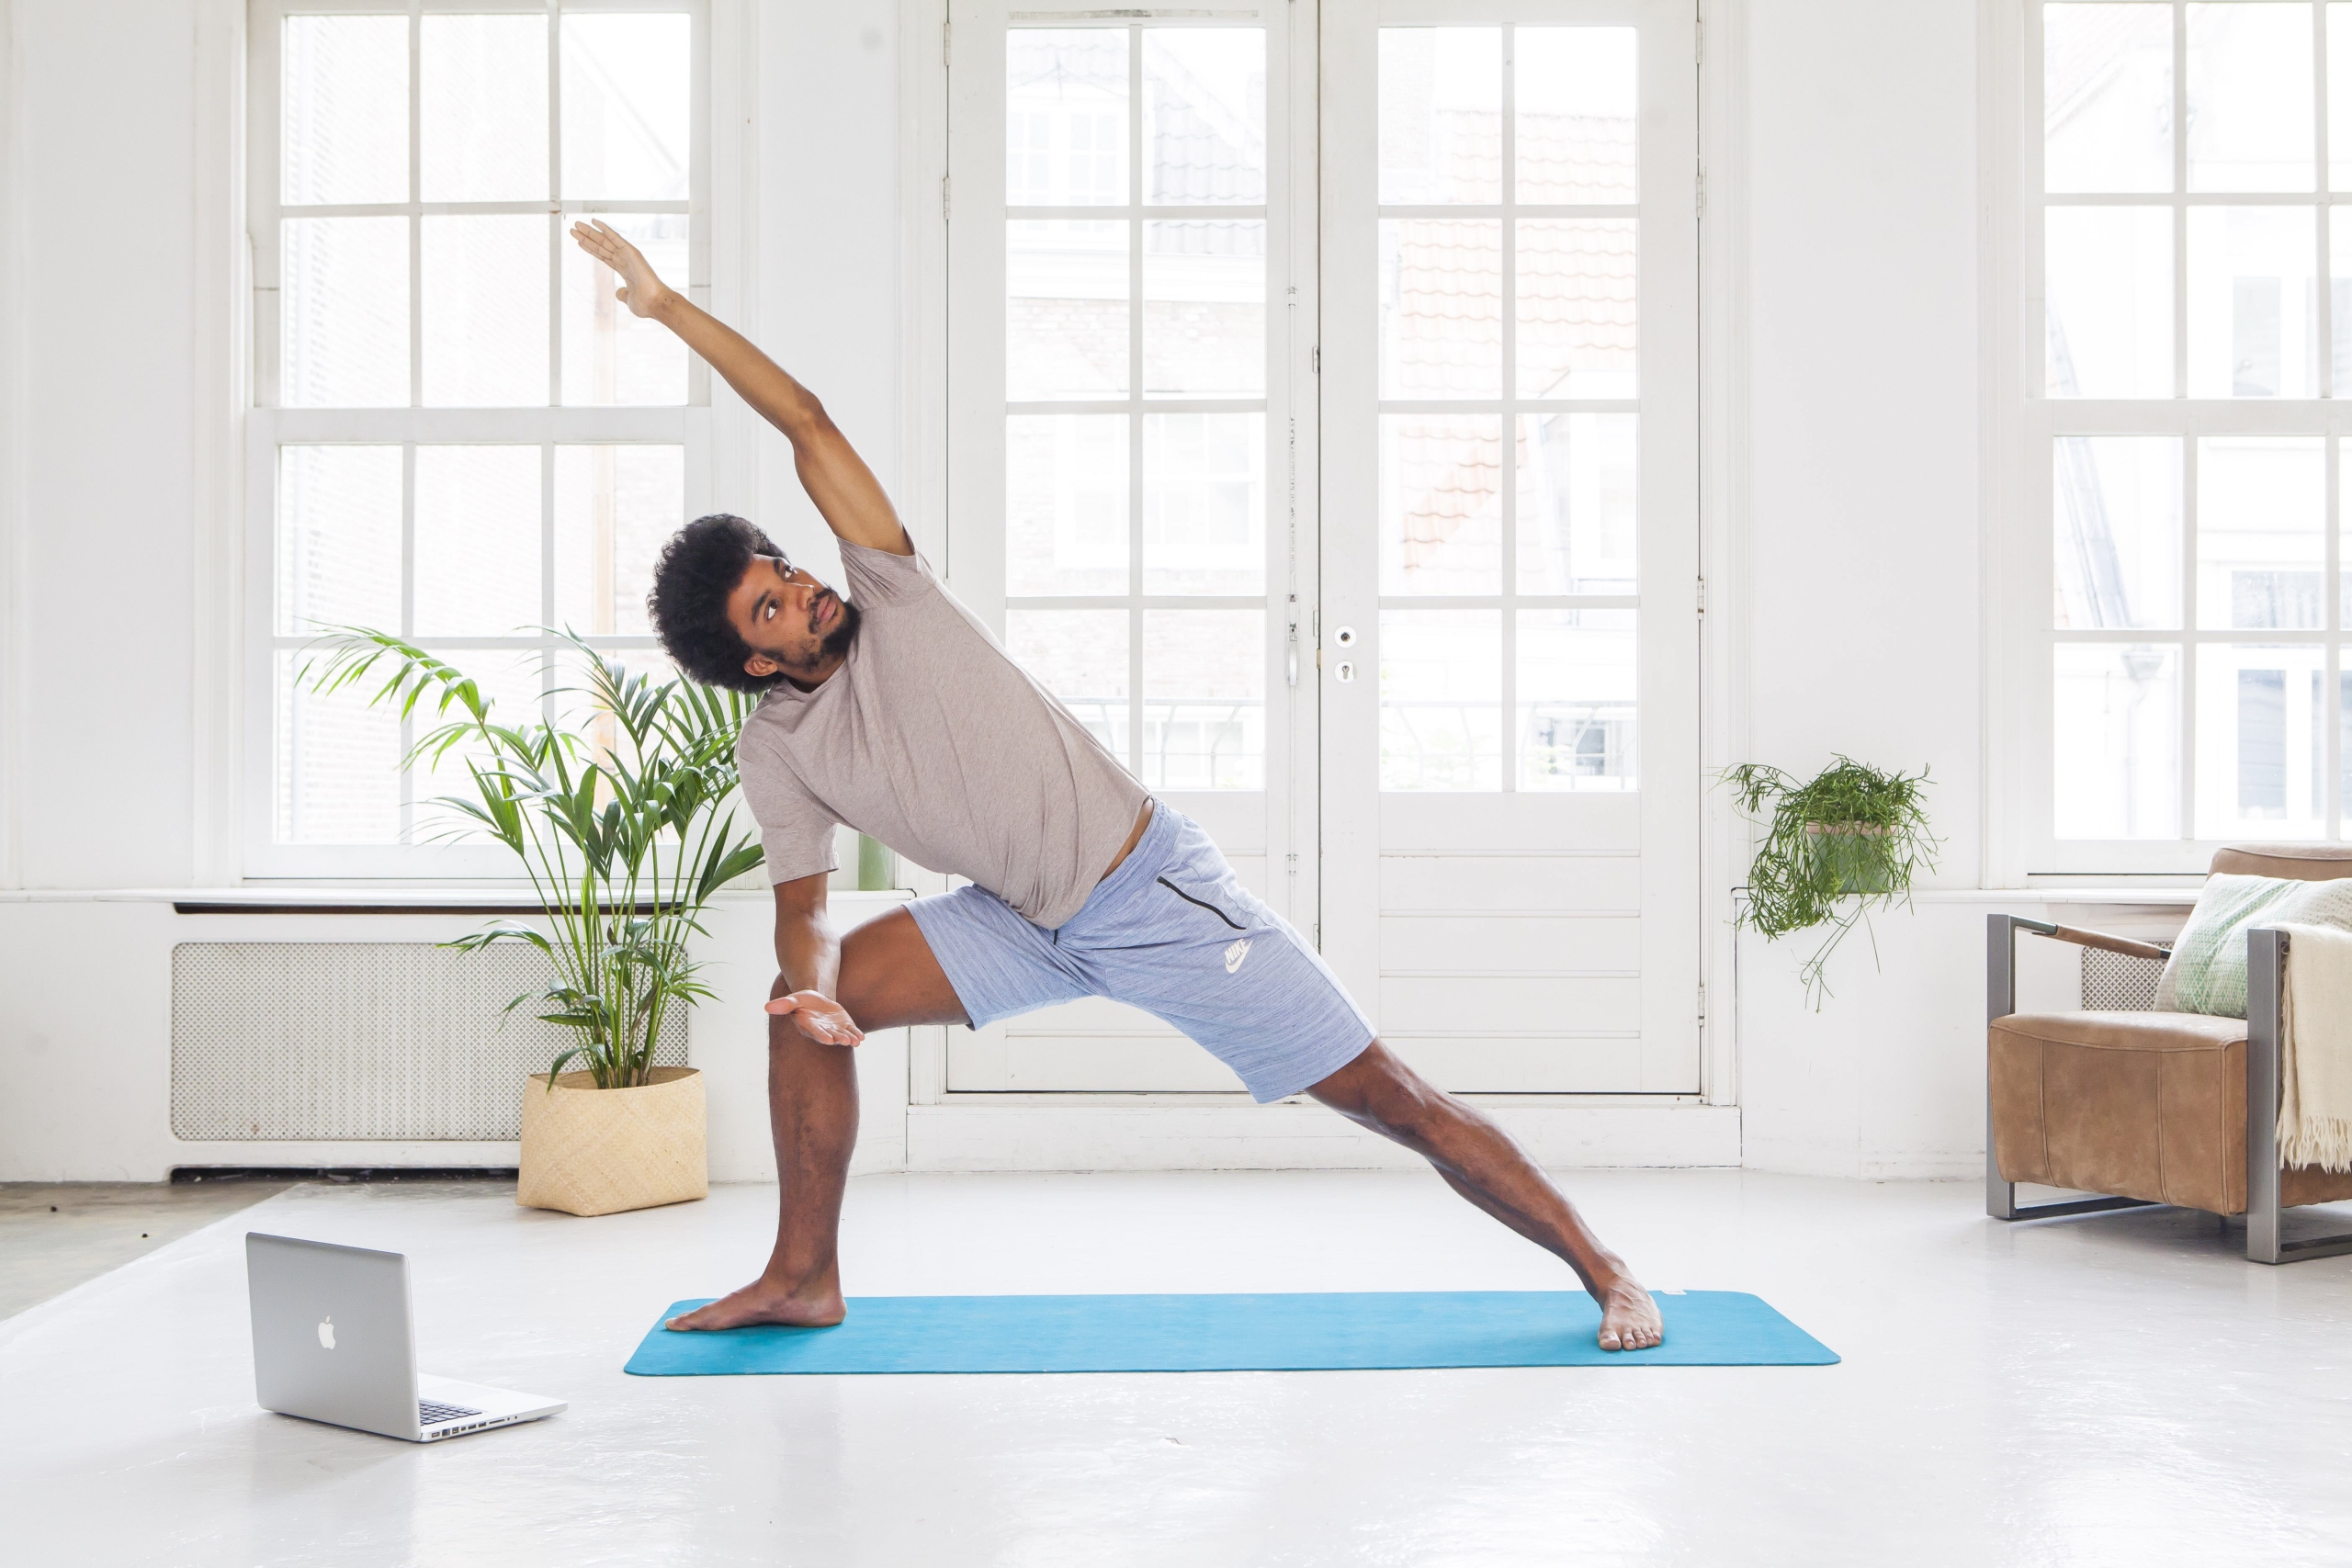 Expert Advice on How to Open a Successful Yoga Studio